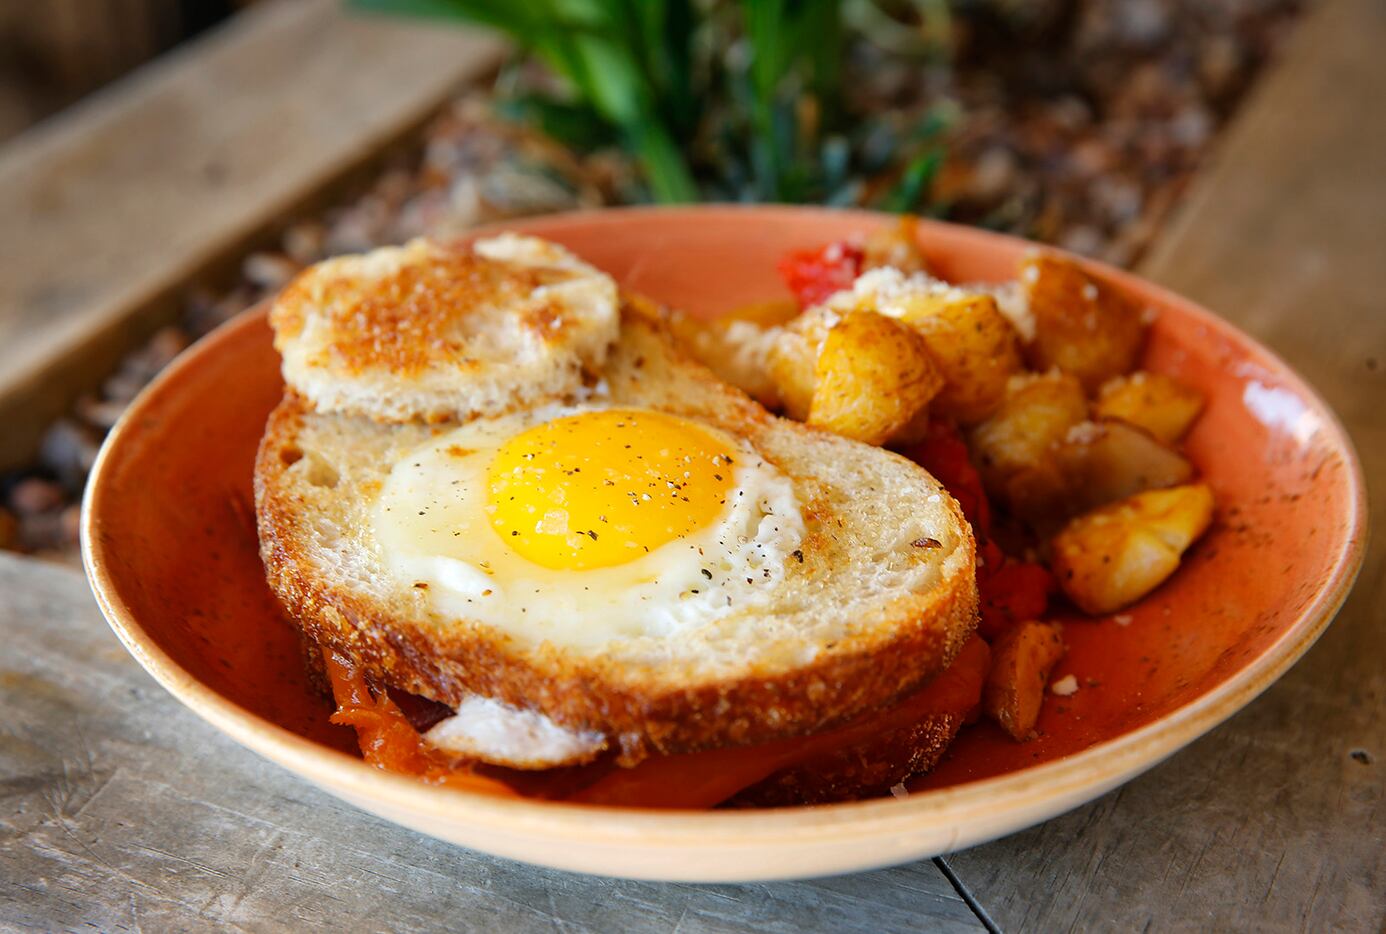 Egg in a Hole on sourdough is served with breakfast potatoes at Press Cafe restaurant at The...